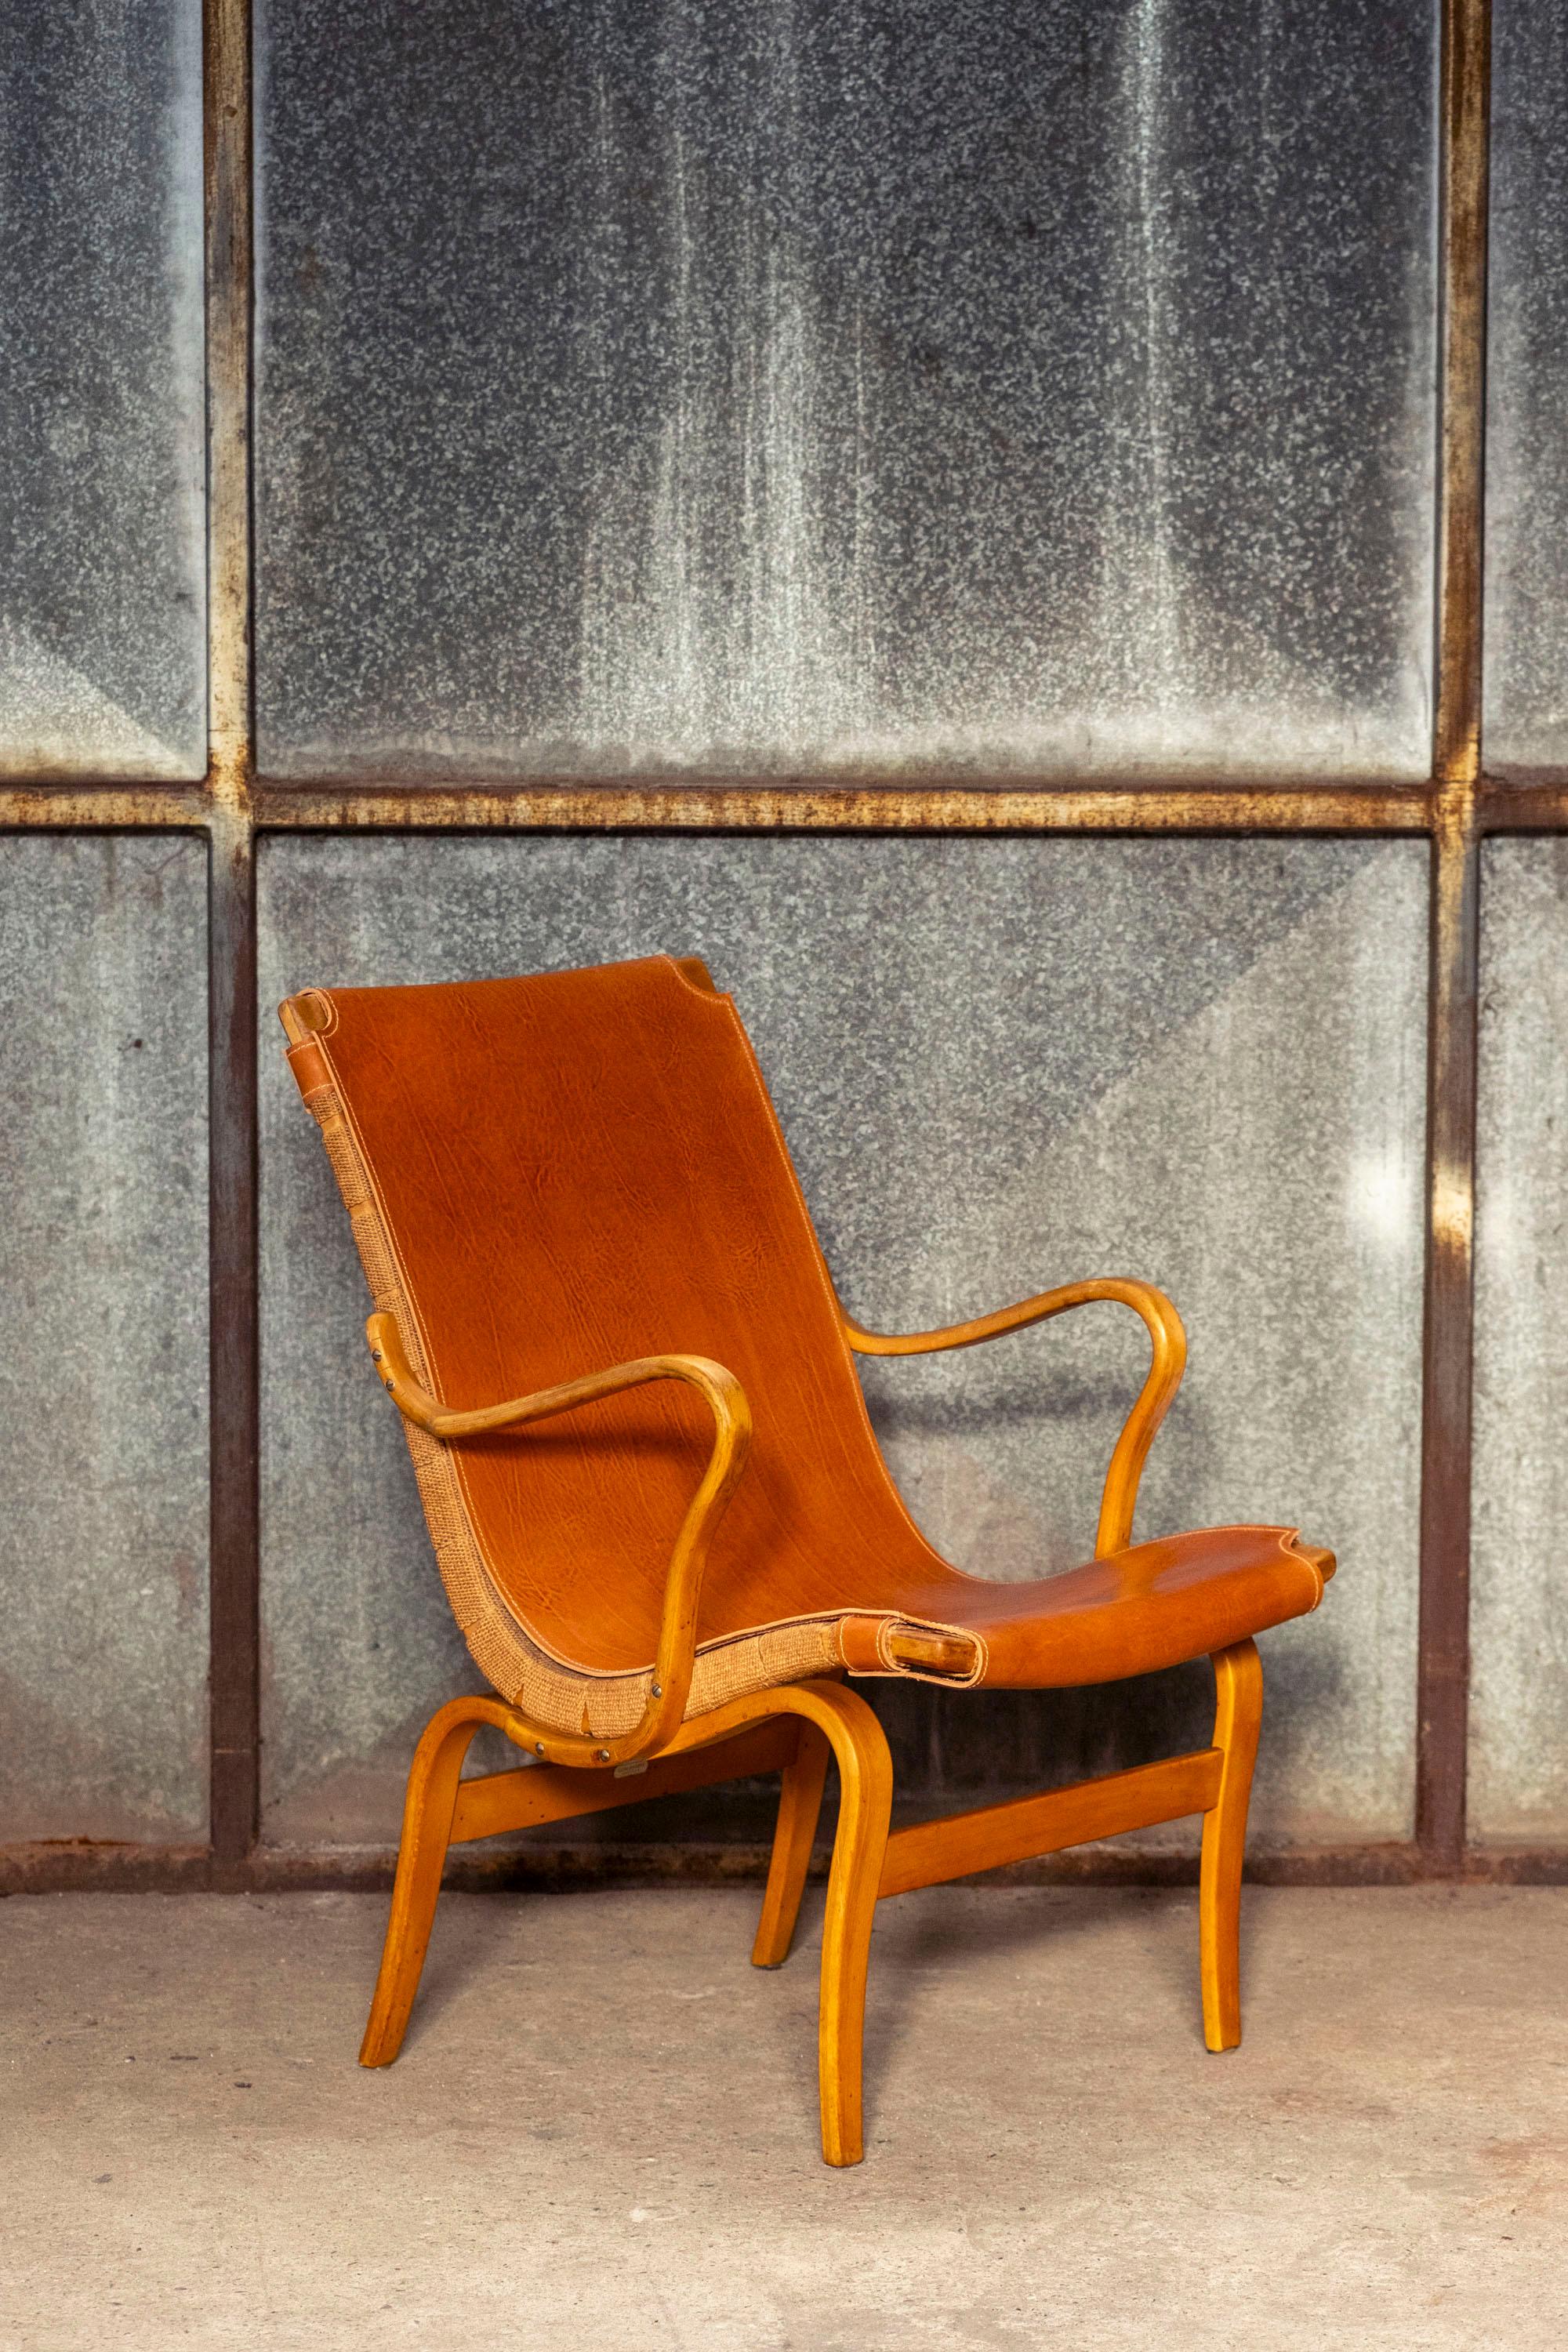 Early lounge chair, model Eva by Bruno Mathsson with full grain leather upholstery.
Produced in the 1960s by Karl Mathsson in Sweden.
Functional, elegant and comfortable armchair.
Maker's mark on the back and Illums Bolighus label from the Danish